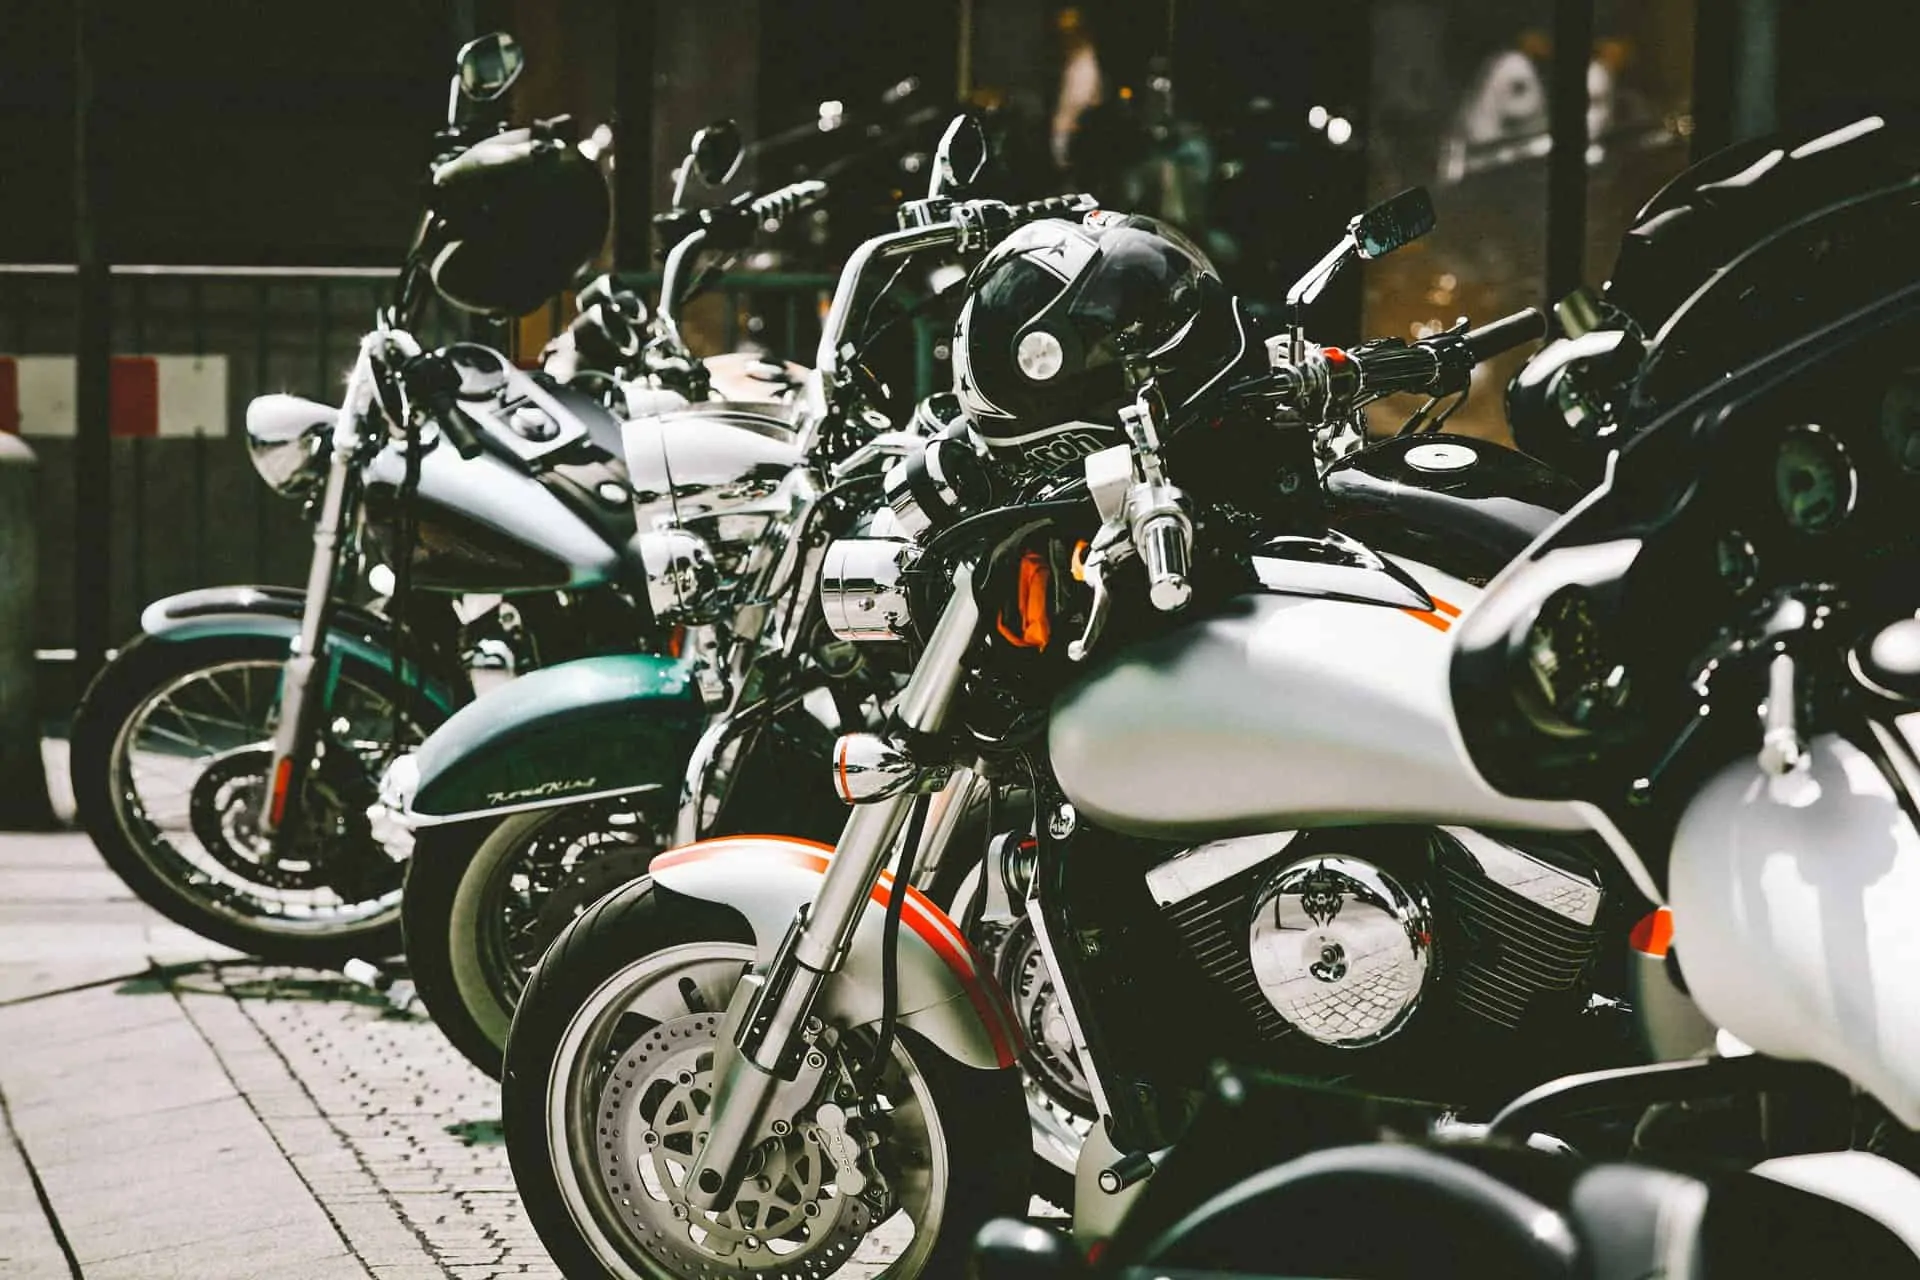 parked motorcycles helmets